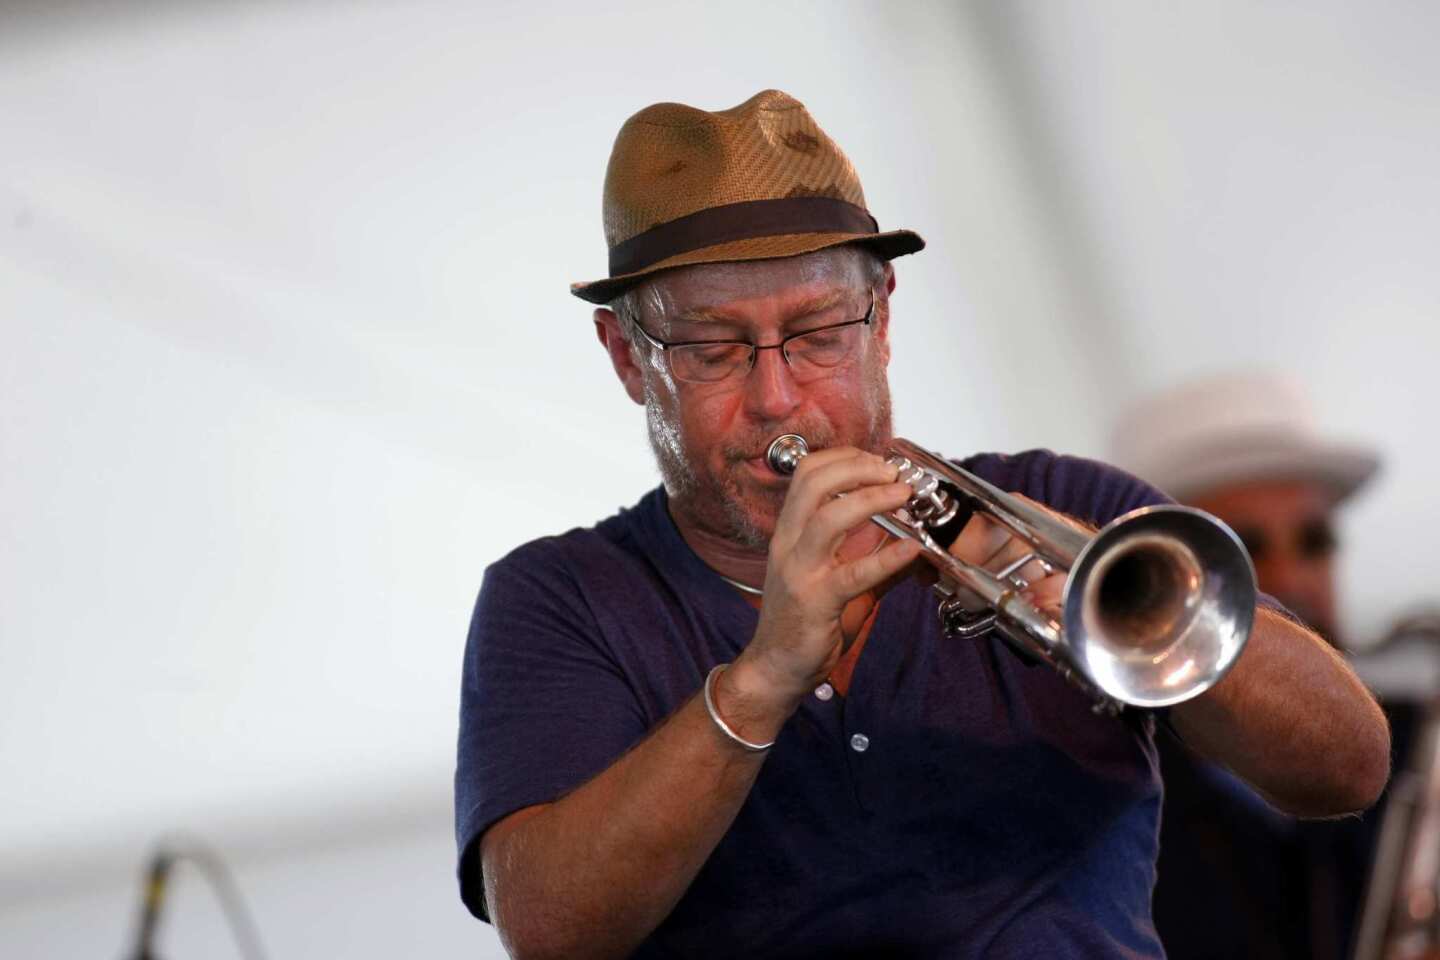 UNDERRATED: Dave Douglas' 'Be Still'